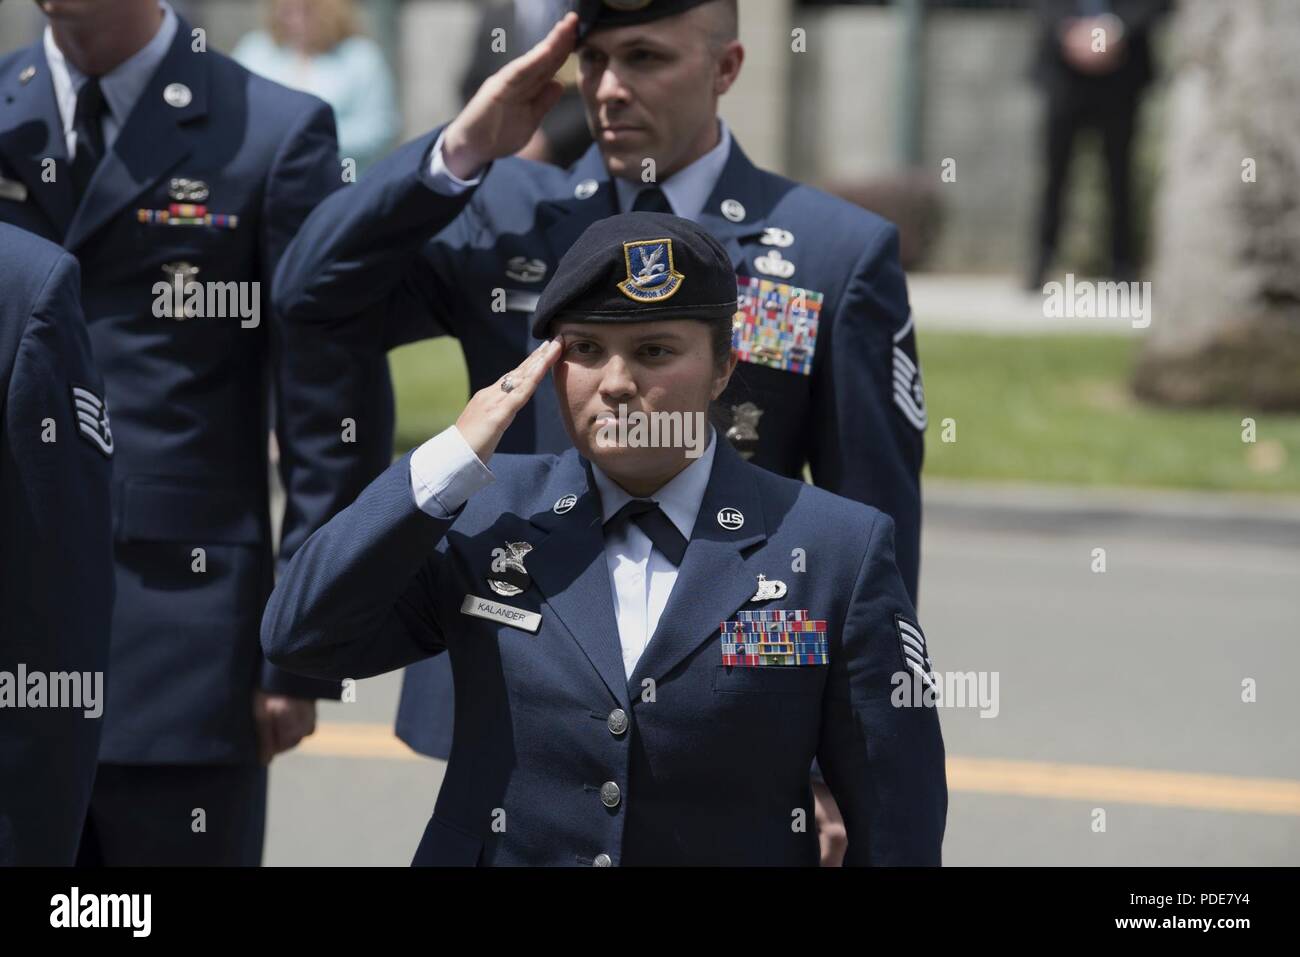 Staff Sgt. Miranda Kalander, 60th Security Forces Squadron military working dog handler, holds a salute during the 29th Annual Peace Officer’s Memorial Ceremony in Fairfield, Calif., May 16, 2018. Nearly a dozen security forces members participated in the ceremony to honor fallen peace officers. Stock Photo